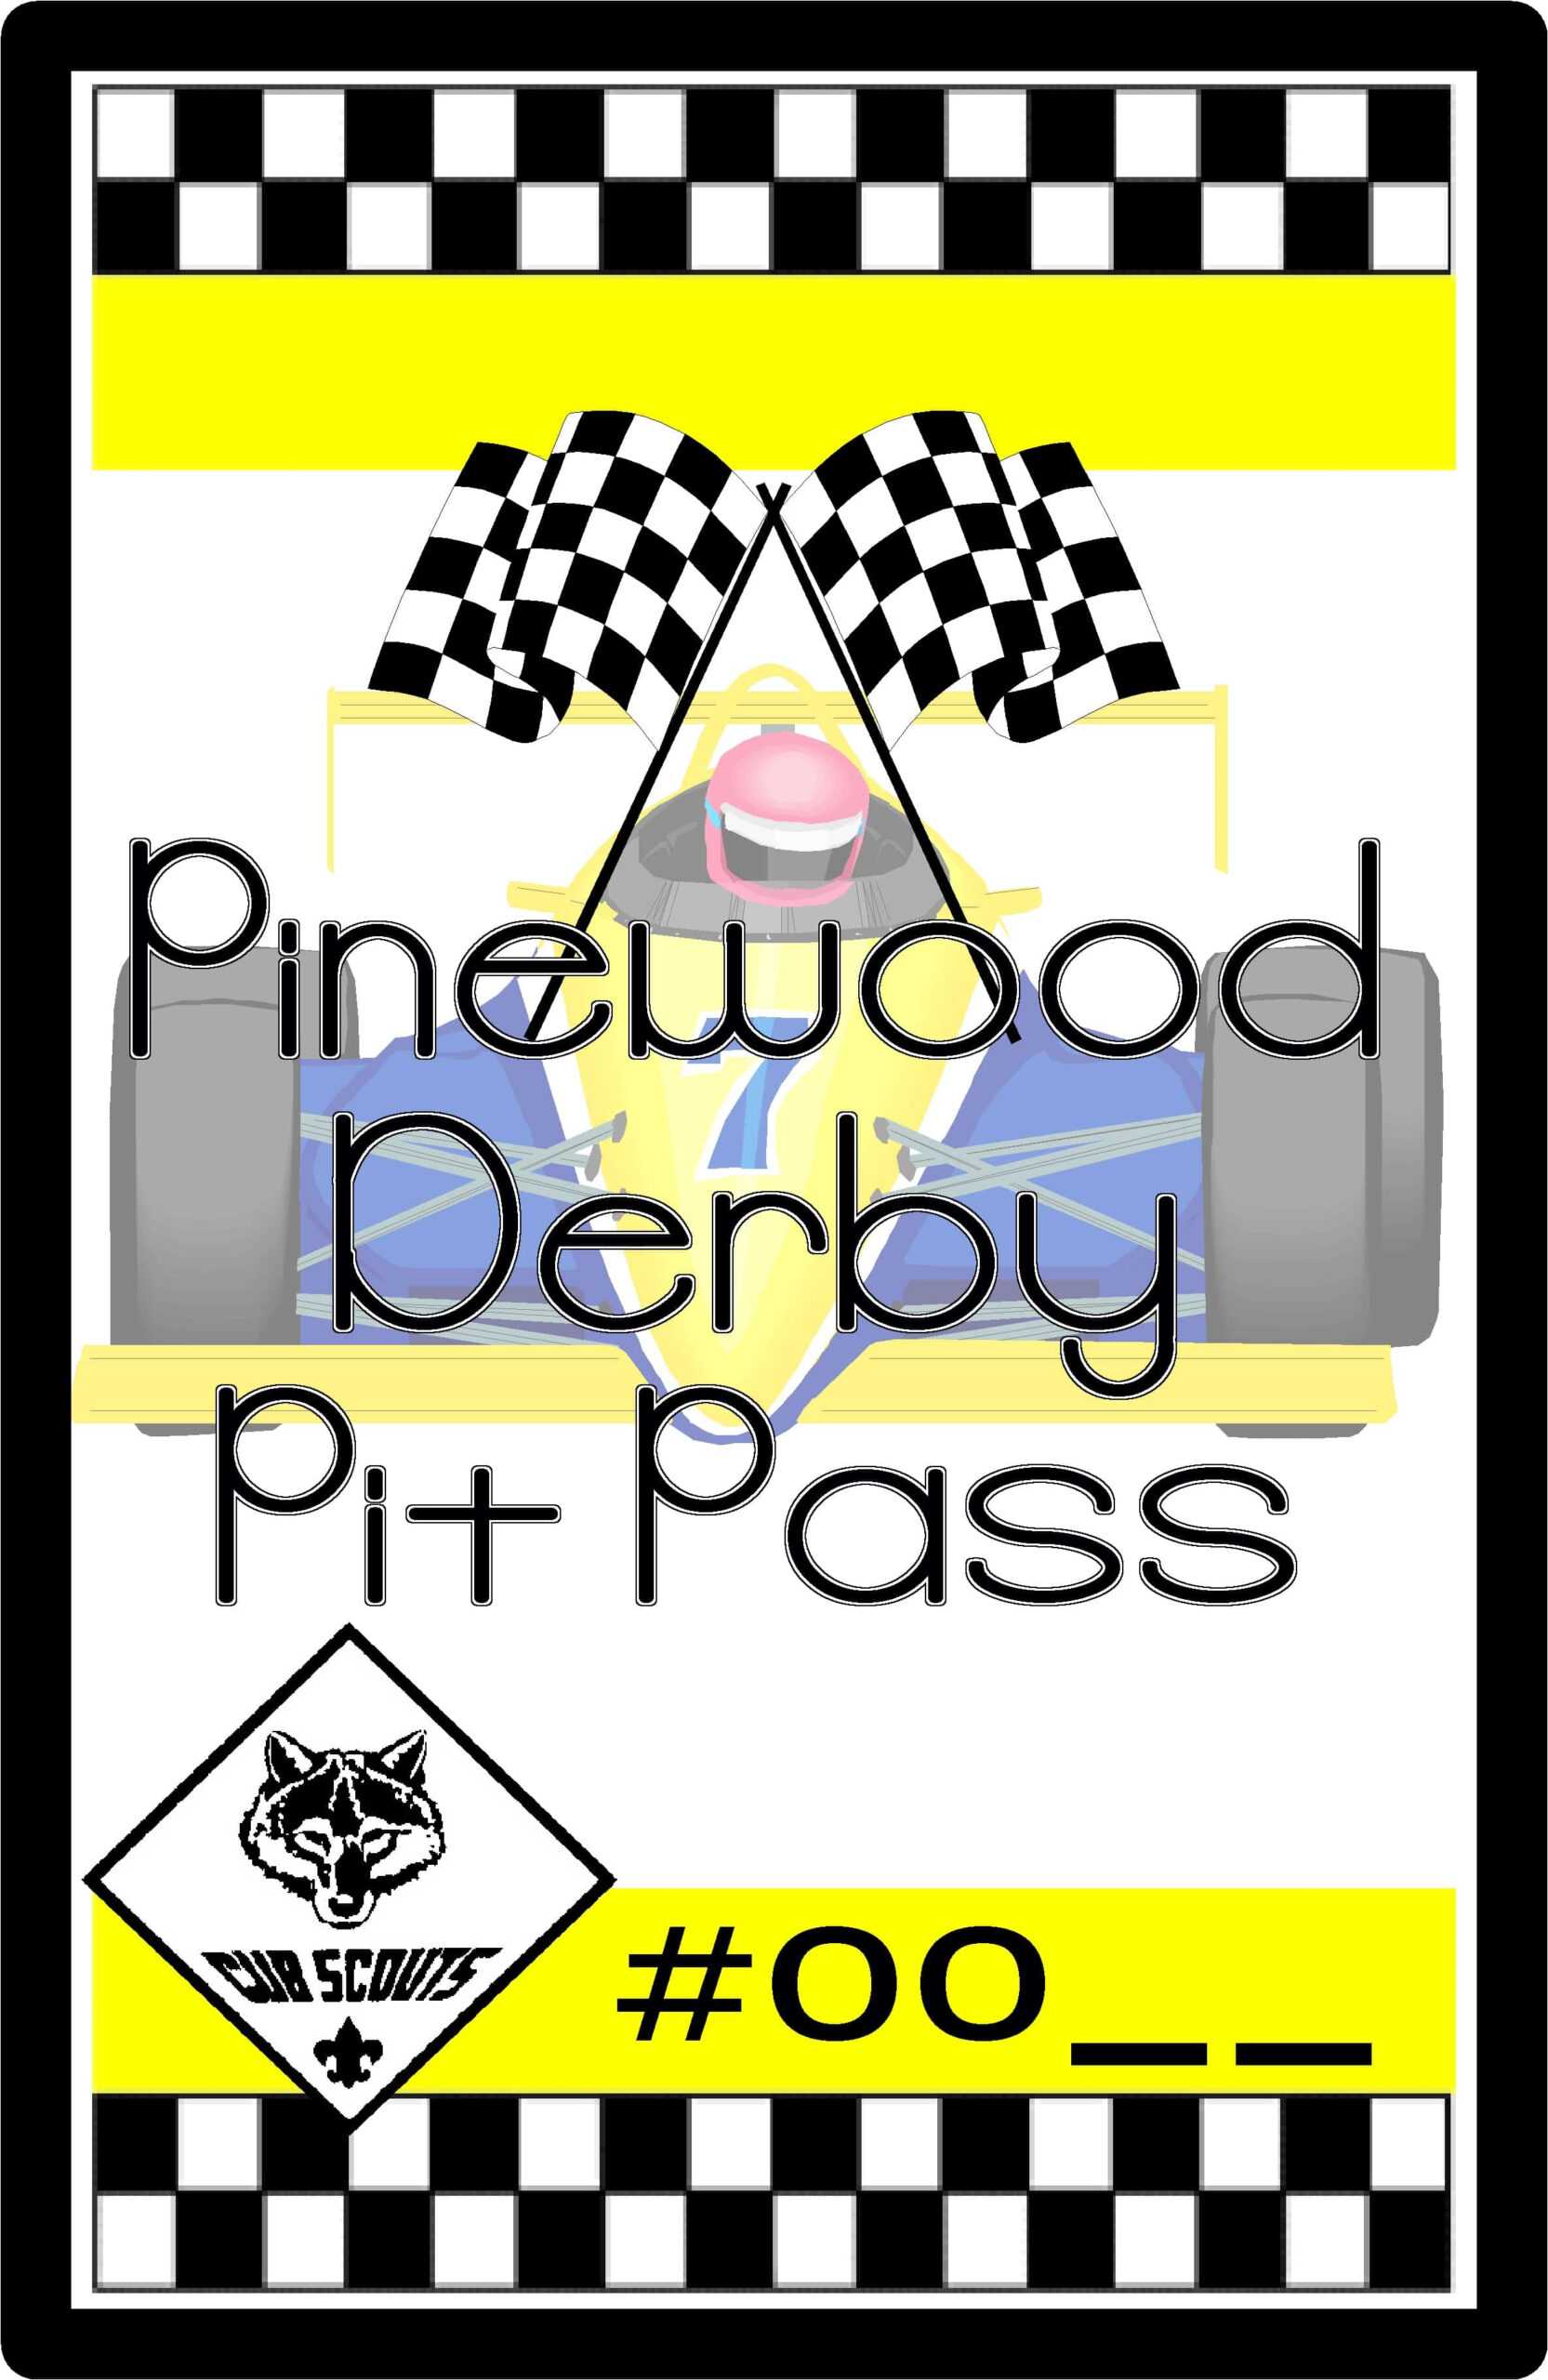 Cub Scout Pinewood Derby Pit Pass For Pinewood Derby Certificate Template